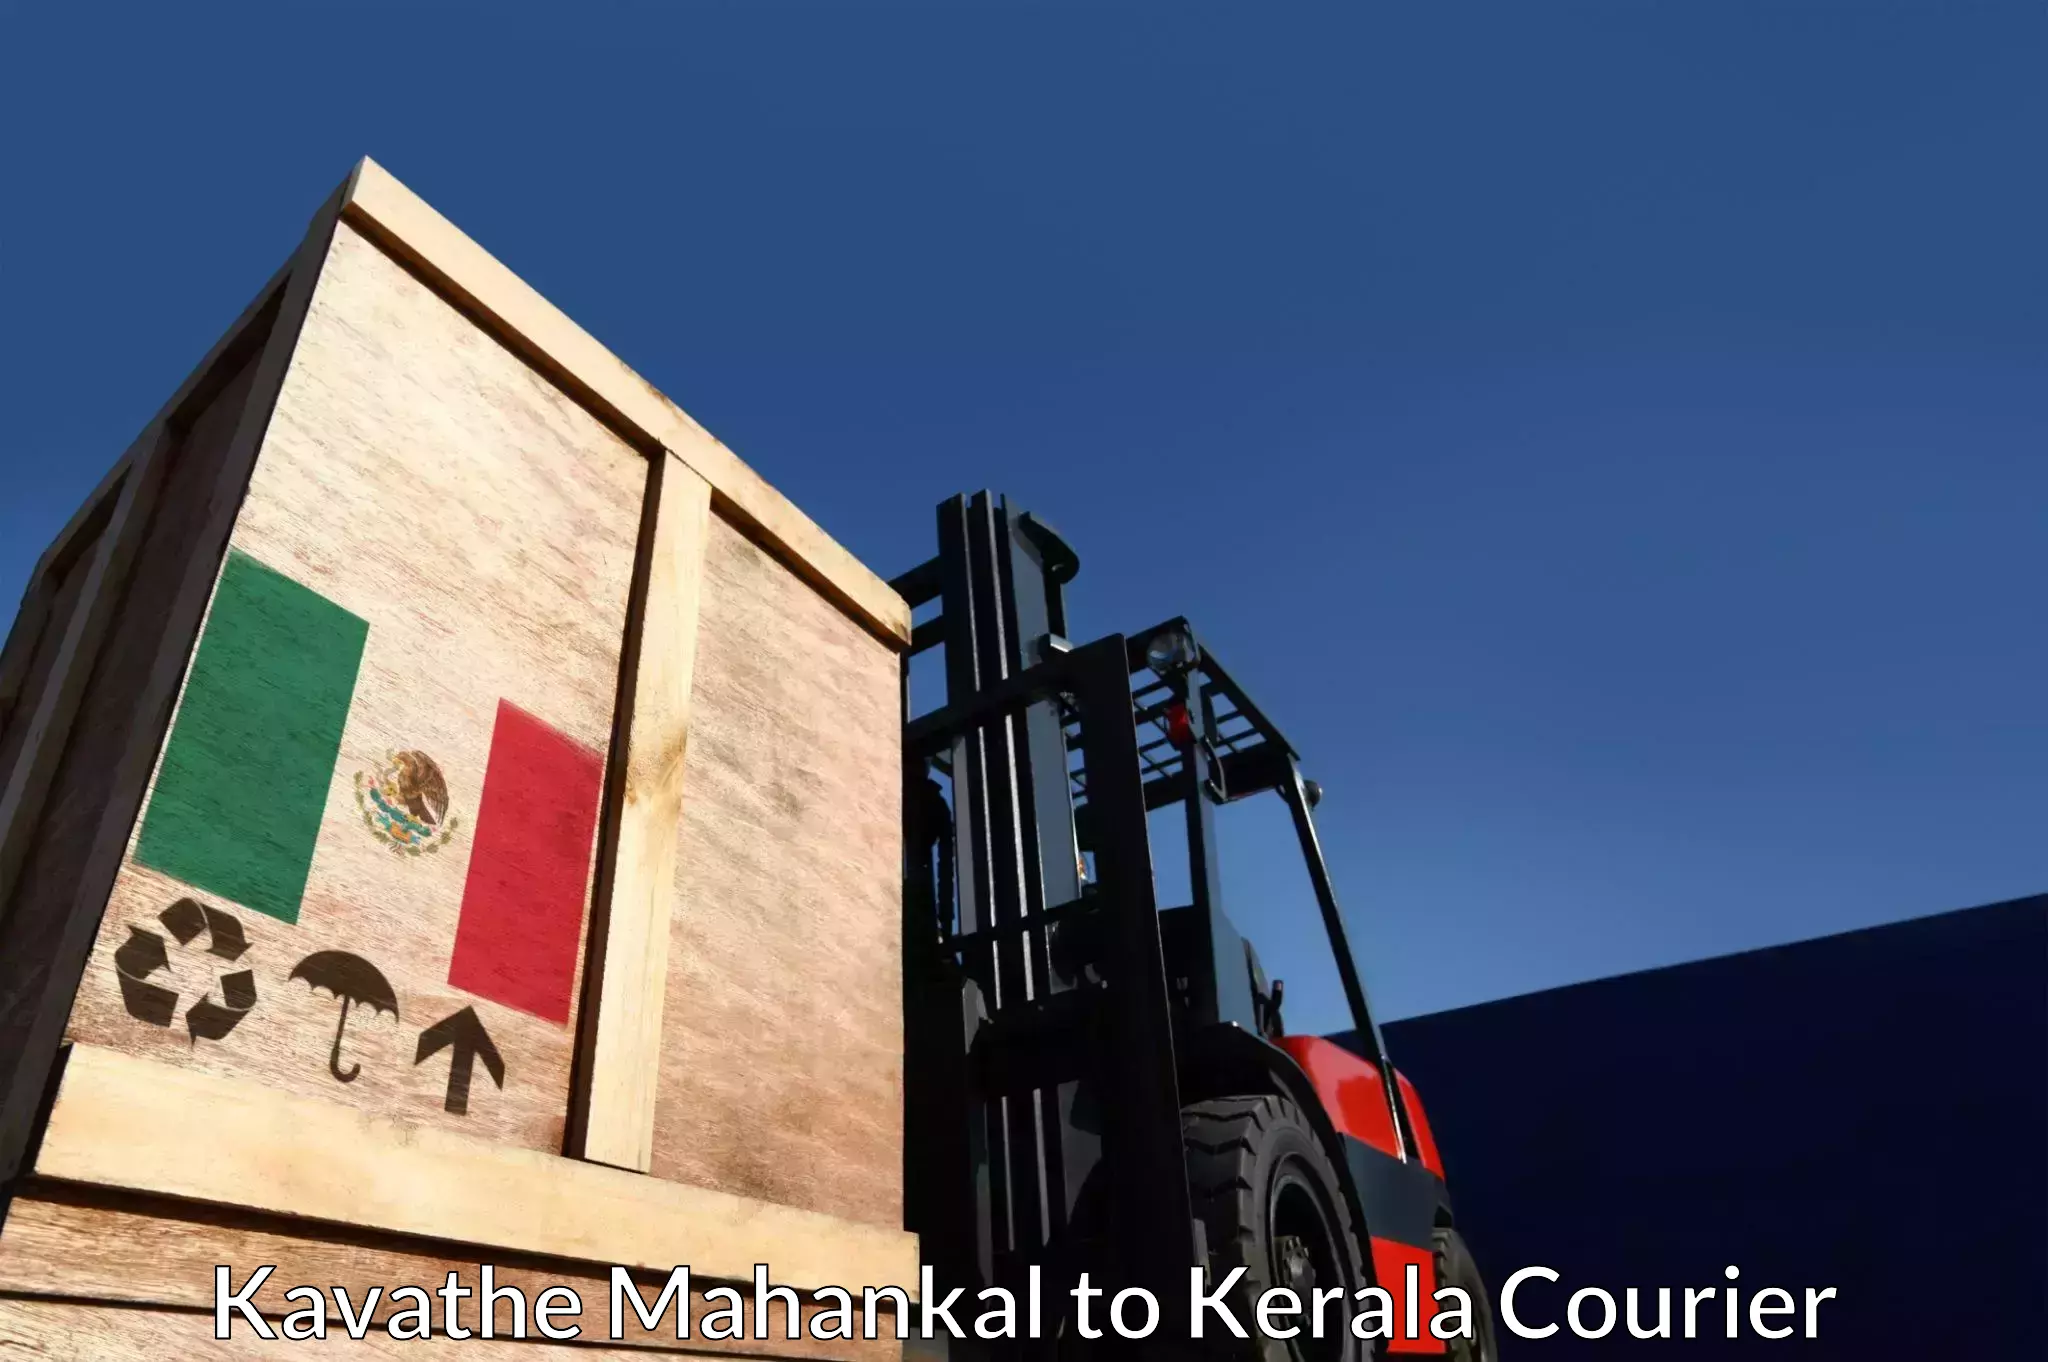 Fast shipping solutions Kavathe Mahankal to Cochin